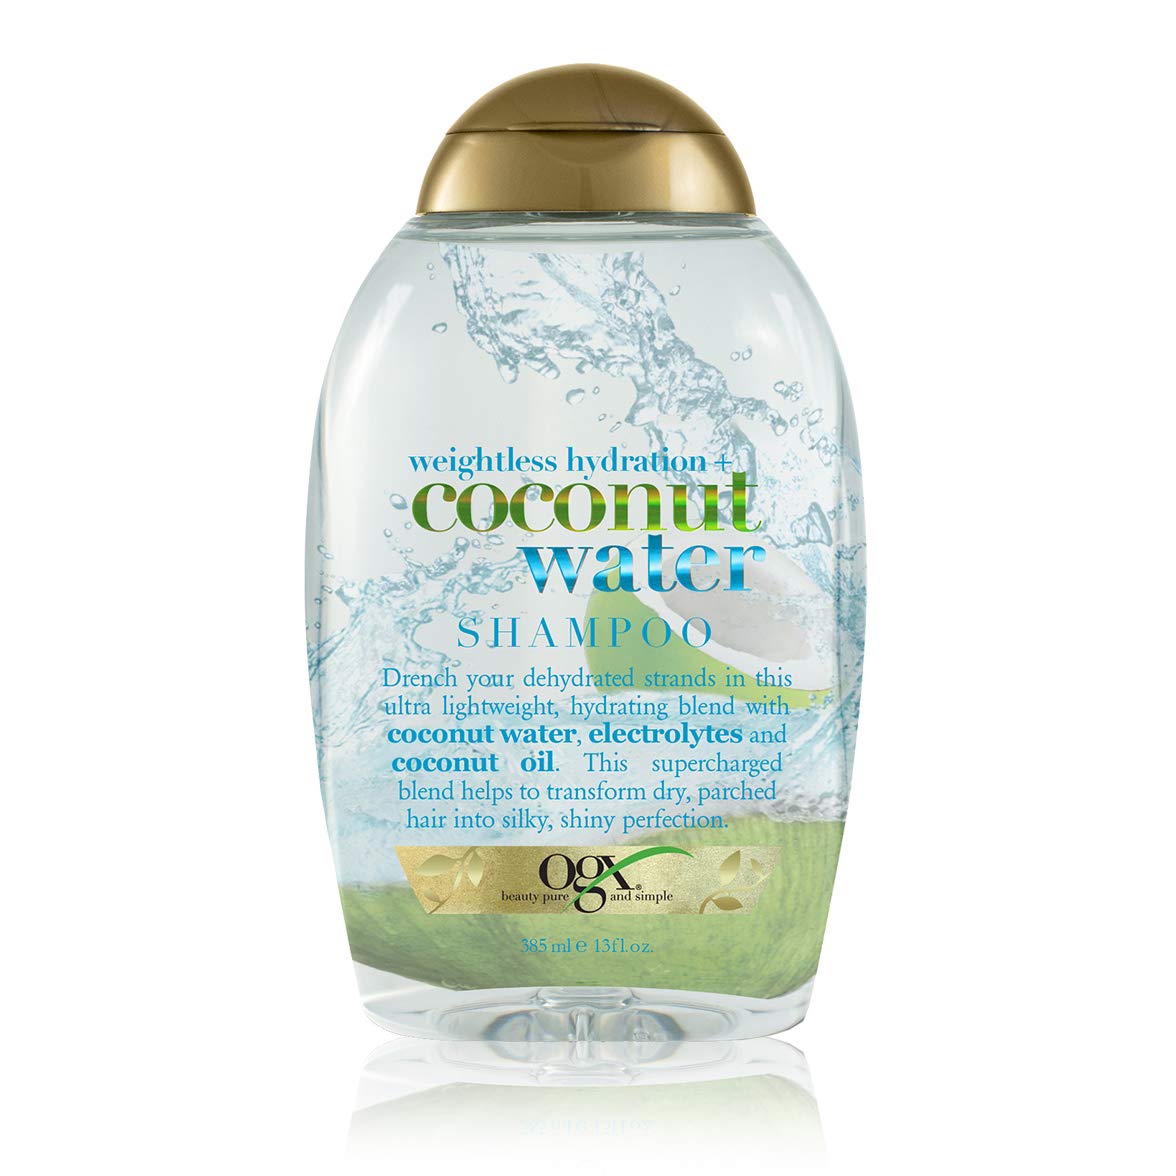 hydration without weight + coconut water shampoo